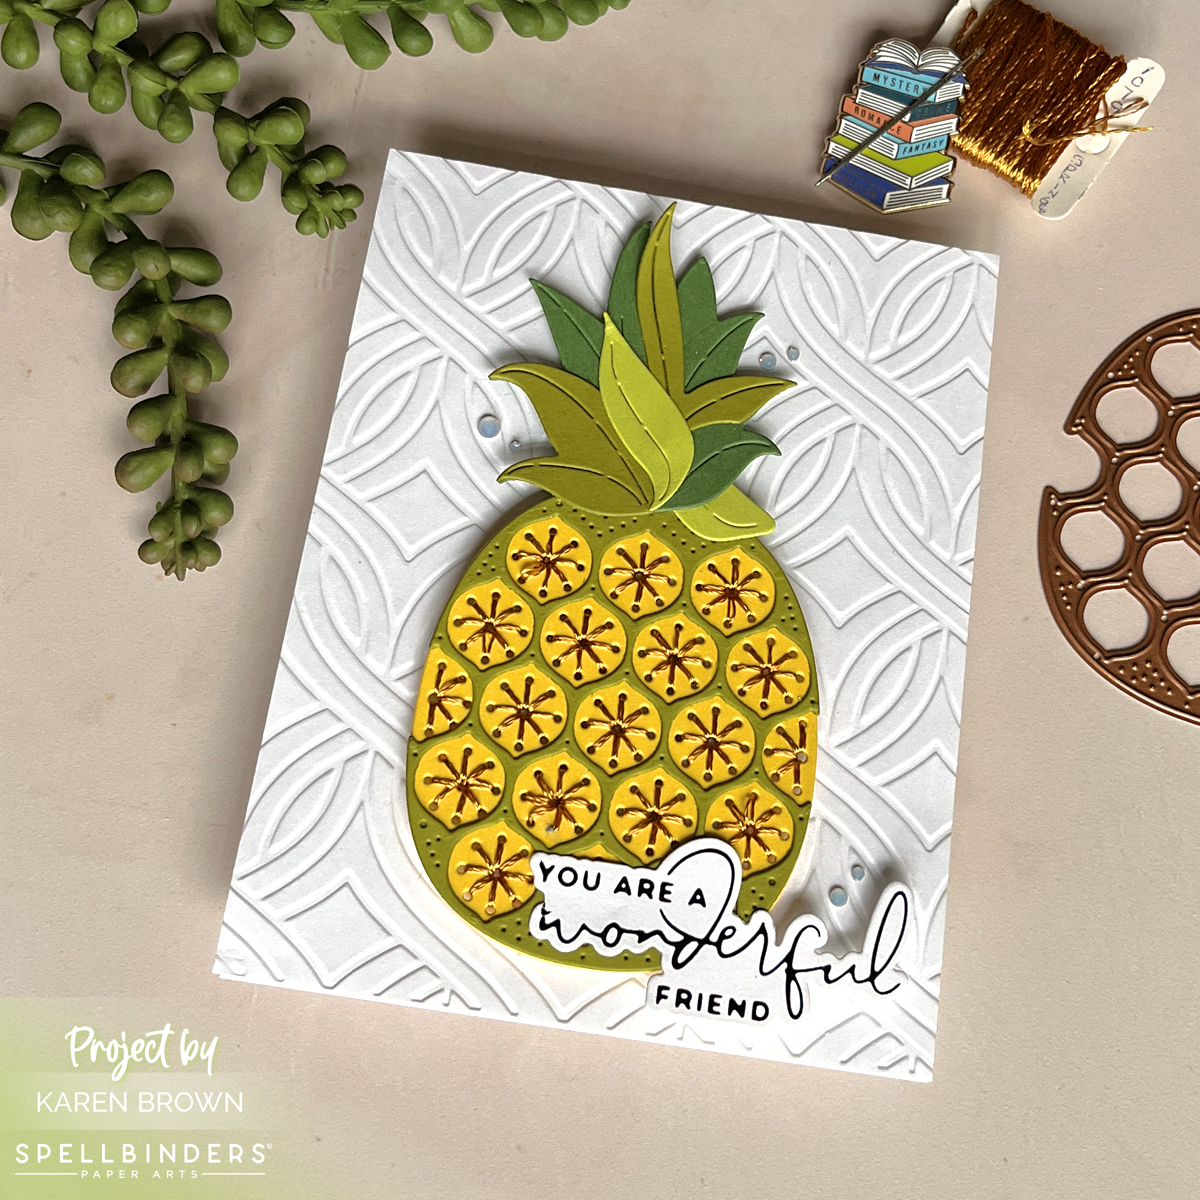 Die cut and hand stitched pineapple card in yellows, golds, and greens.